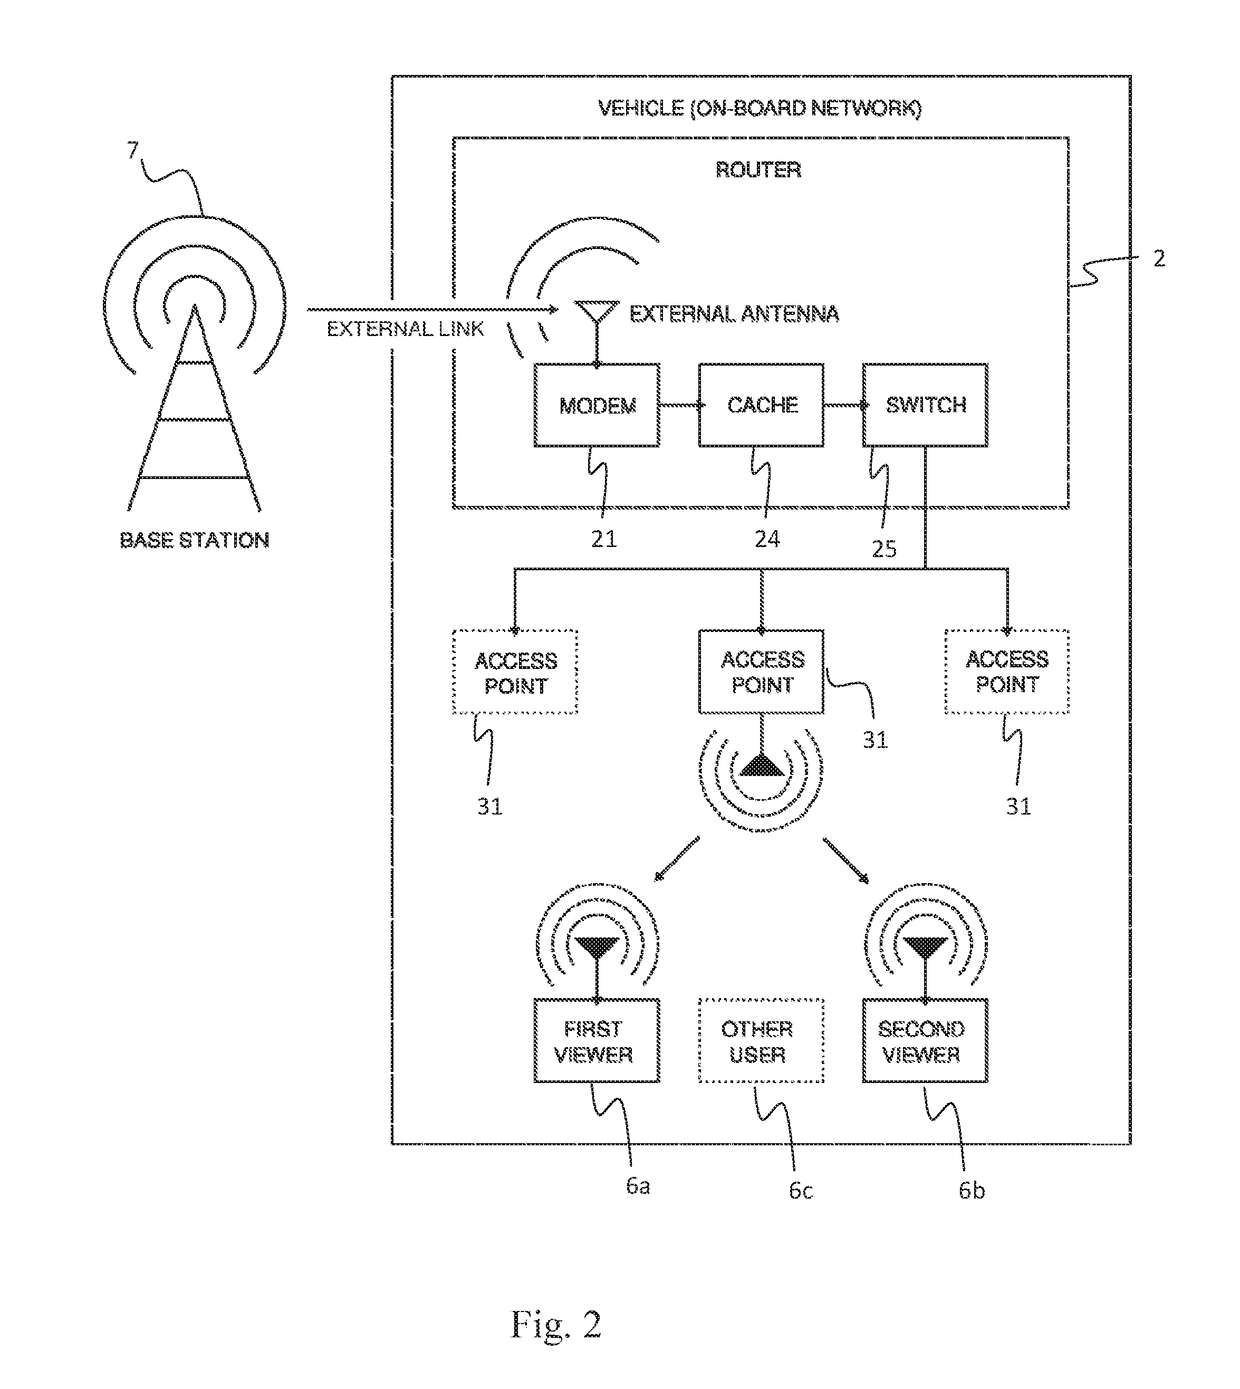 Method and system for bandwidth constrained media streaming to a moving vehicle